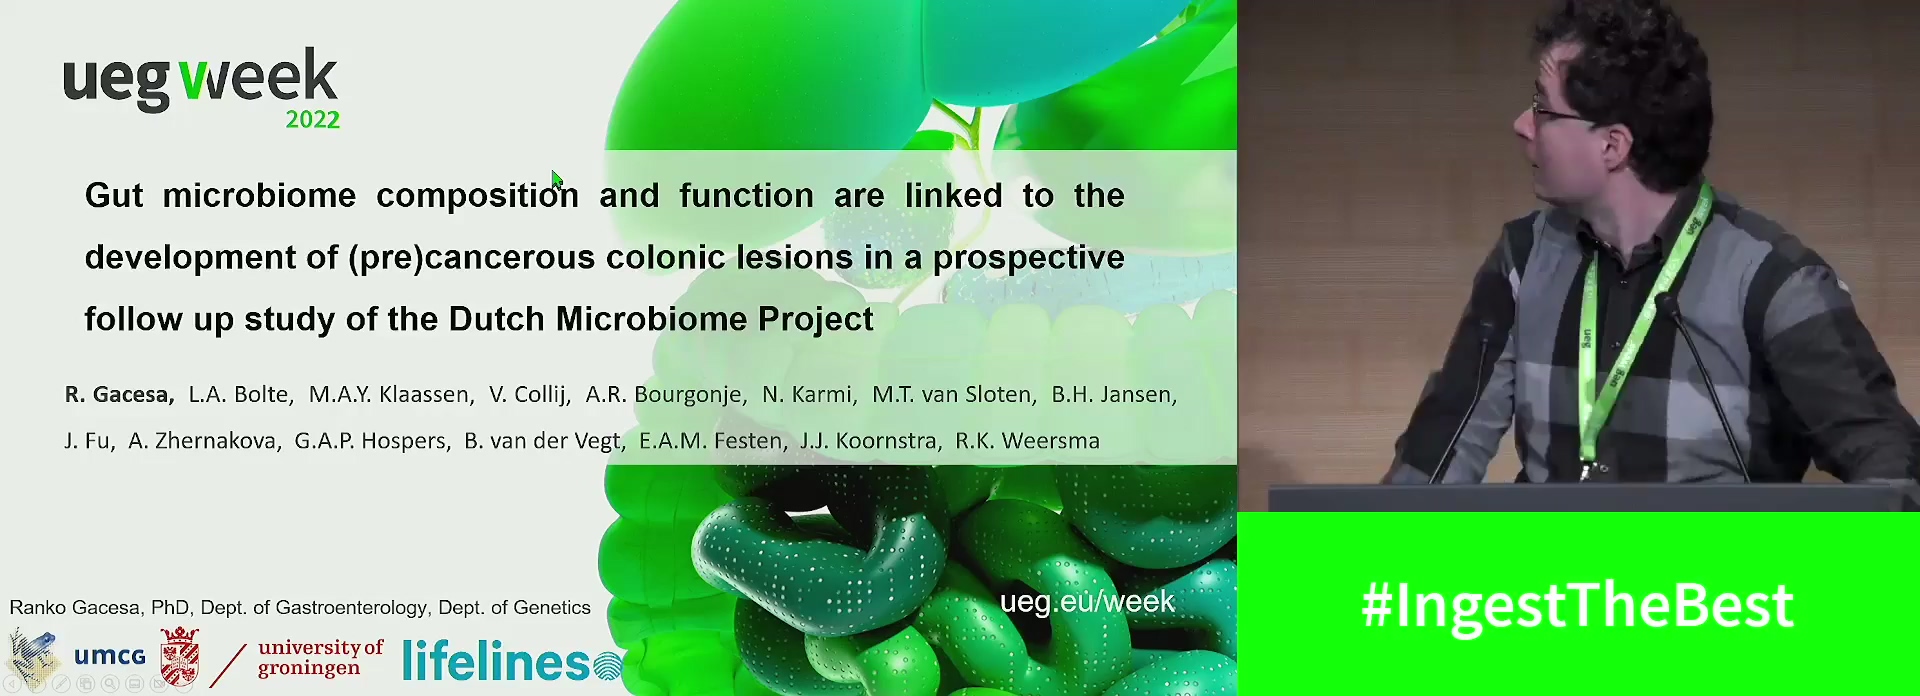 GUT MICROBIOME COMPOSITION AND FUNCTION ARE LINKED TO THE DEVELOPMENT OF (PRE)CANCEROUS COLONIC LESIONS IN A PROSPECTIVE FOLLOW UP STUDY OF THE DUTCH MICROBIOME PROJECT